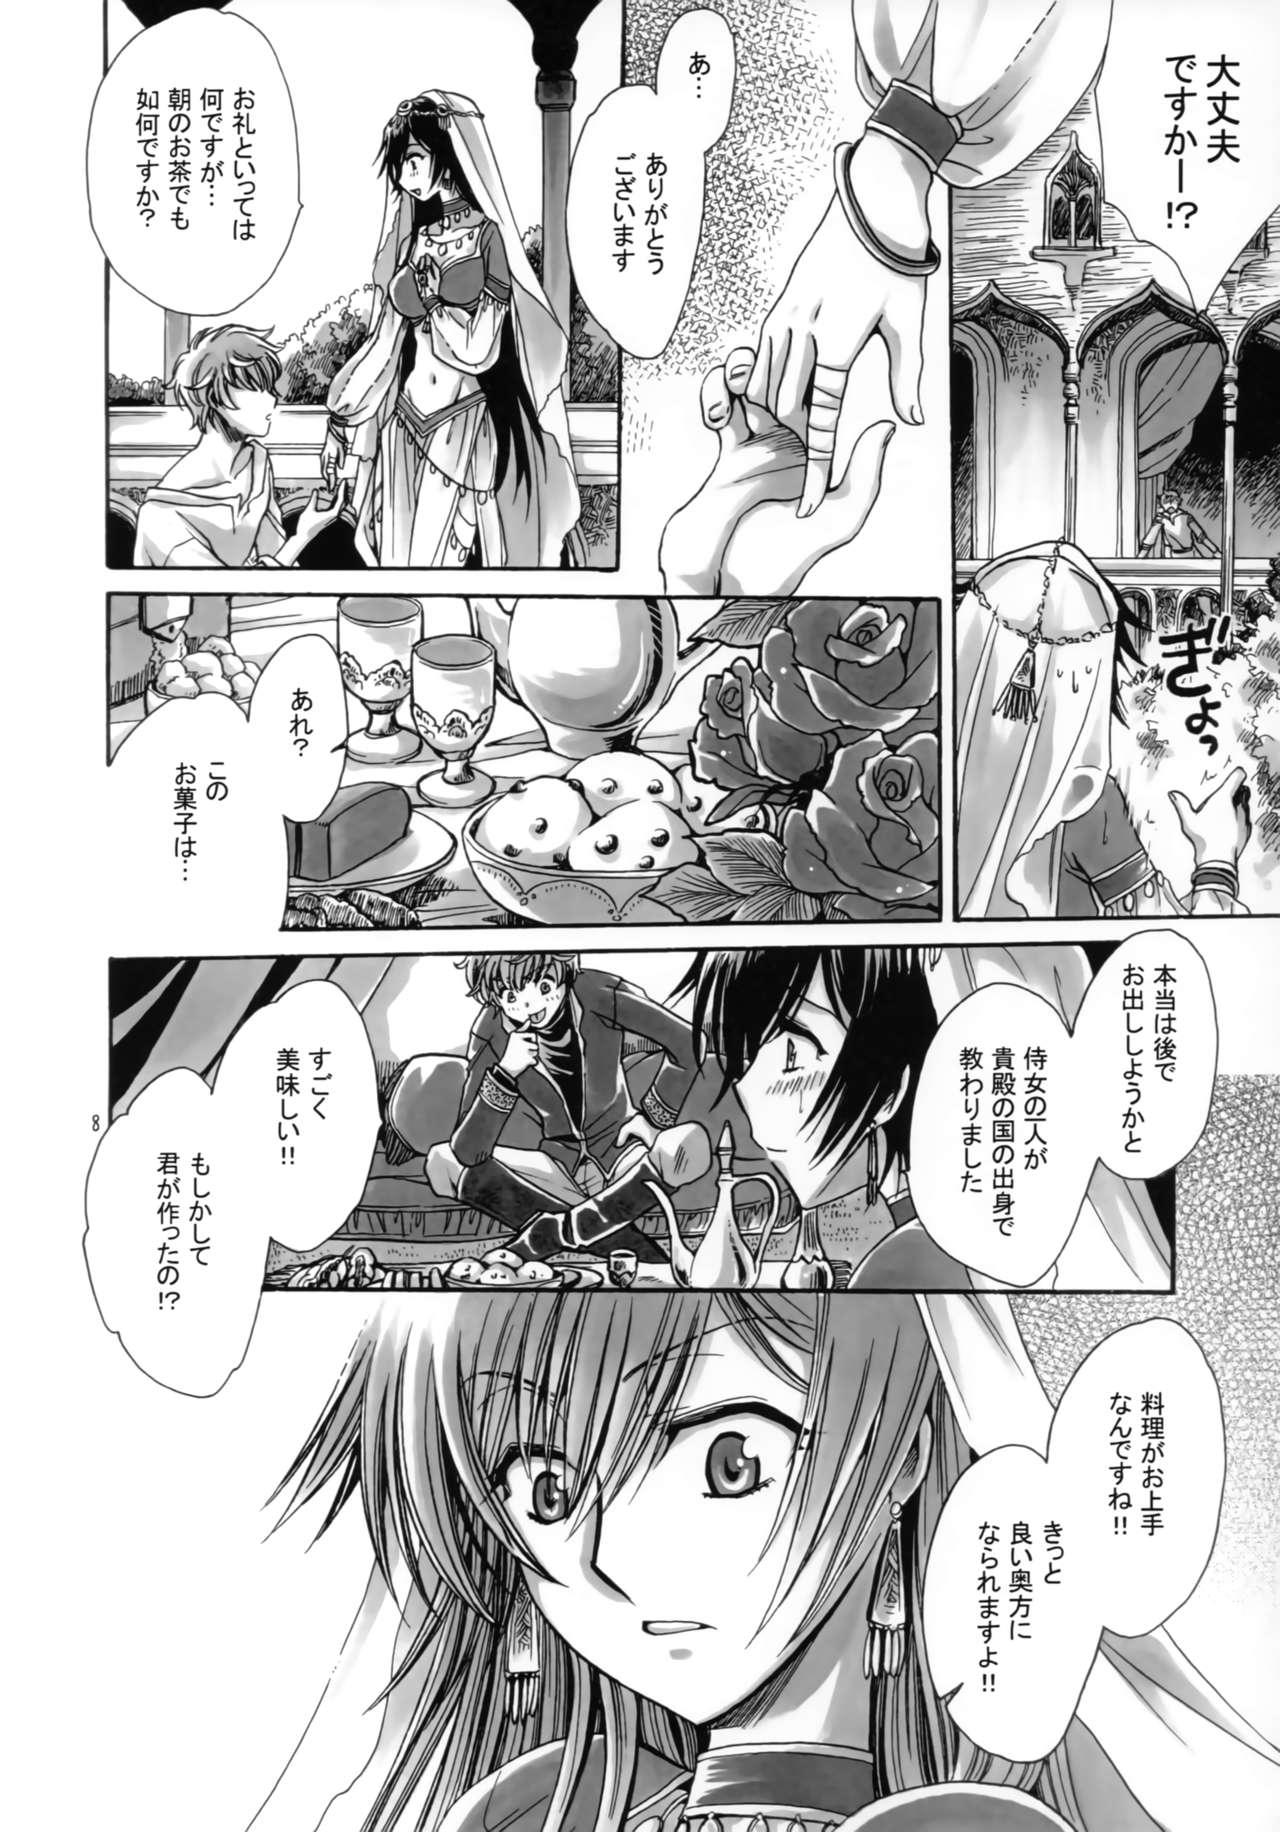 Assfucked a lot of Princesses - Code geass Female Orgasm - Page 7